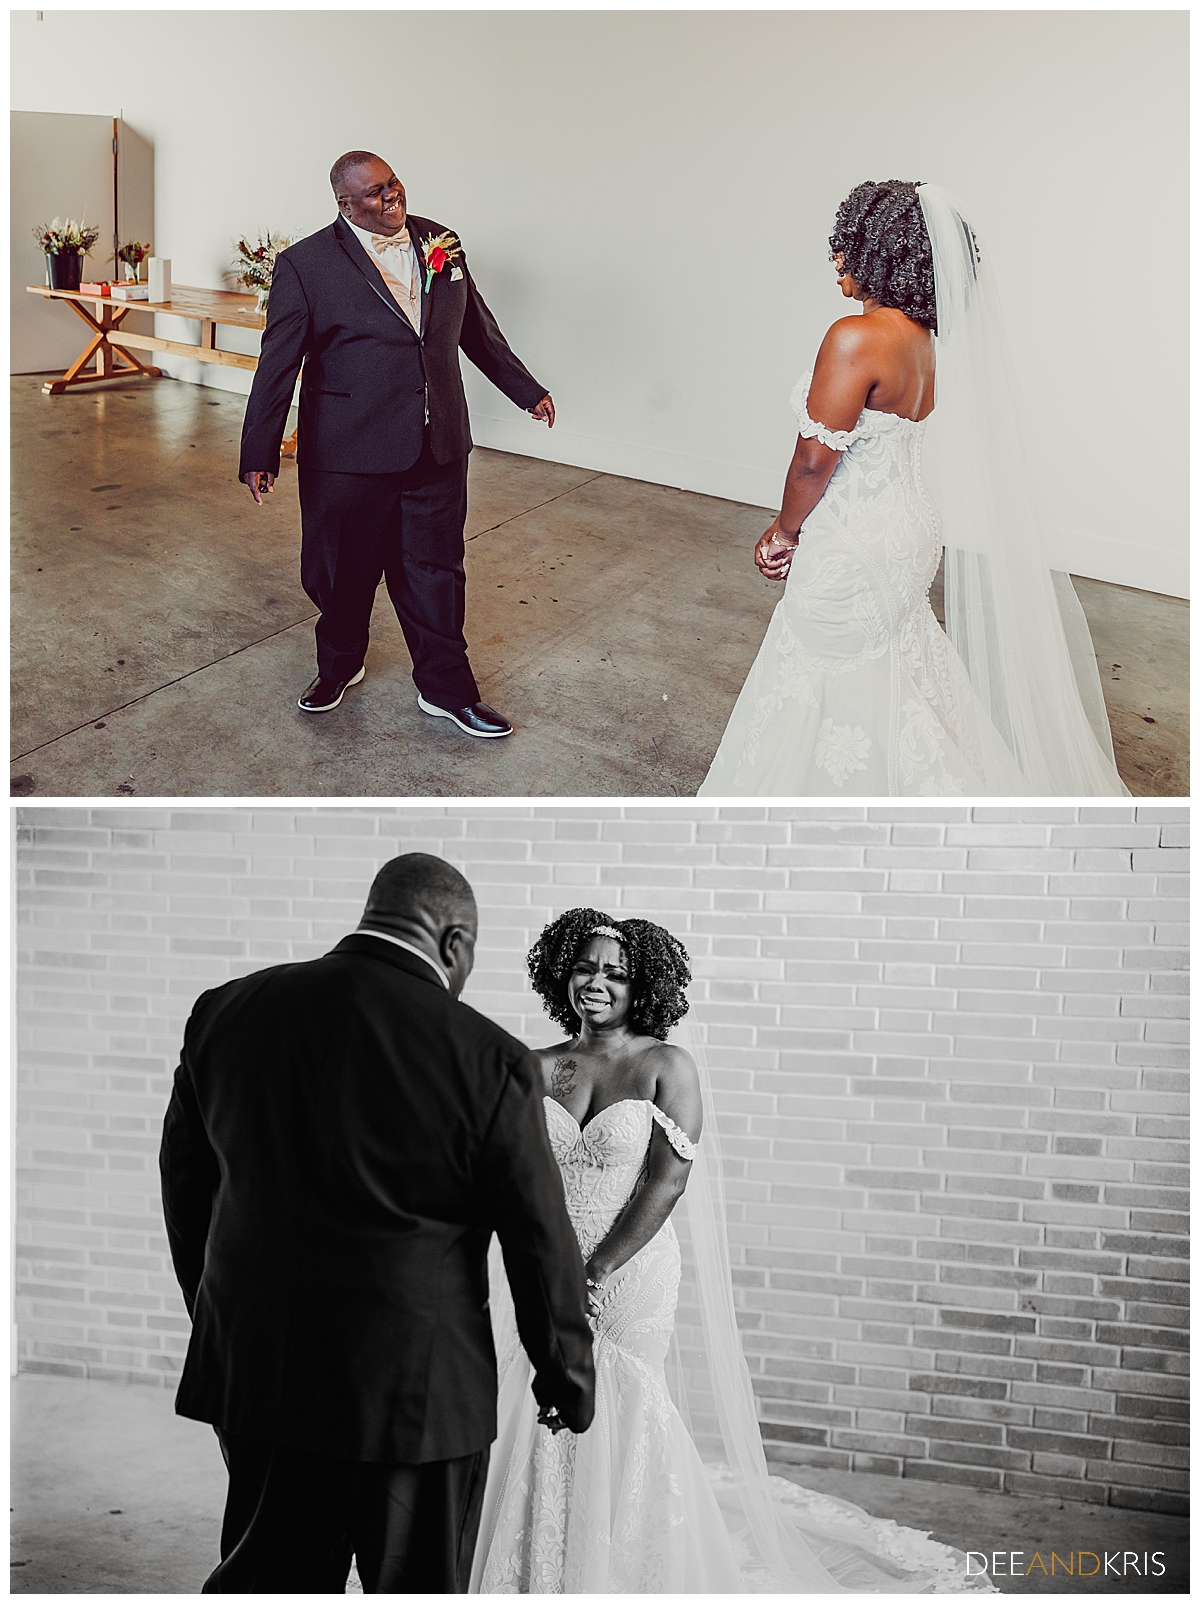 Two images: Top color image of father turning to see bride in her dress. Bottom black and white image of bride tearfully smiling as father sees her for the first time.